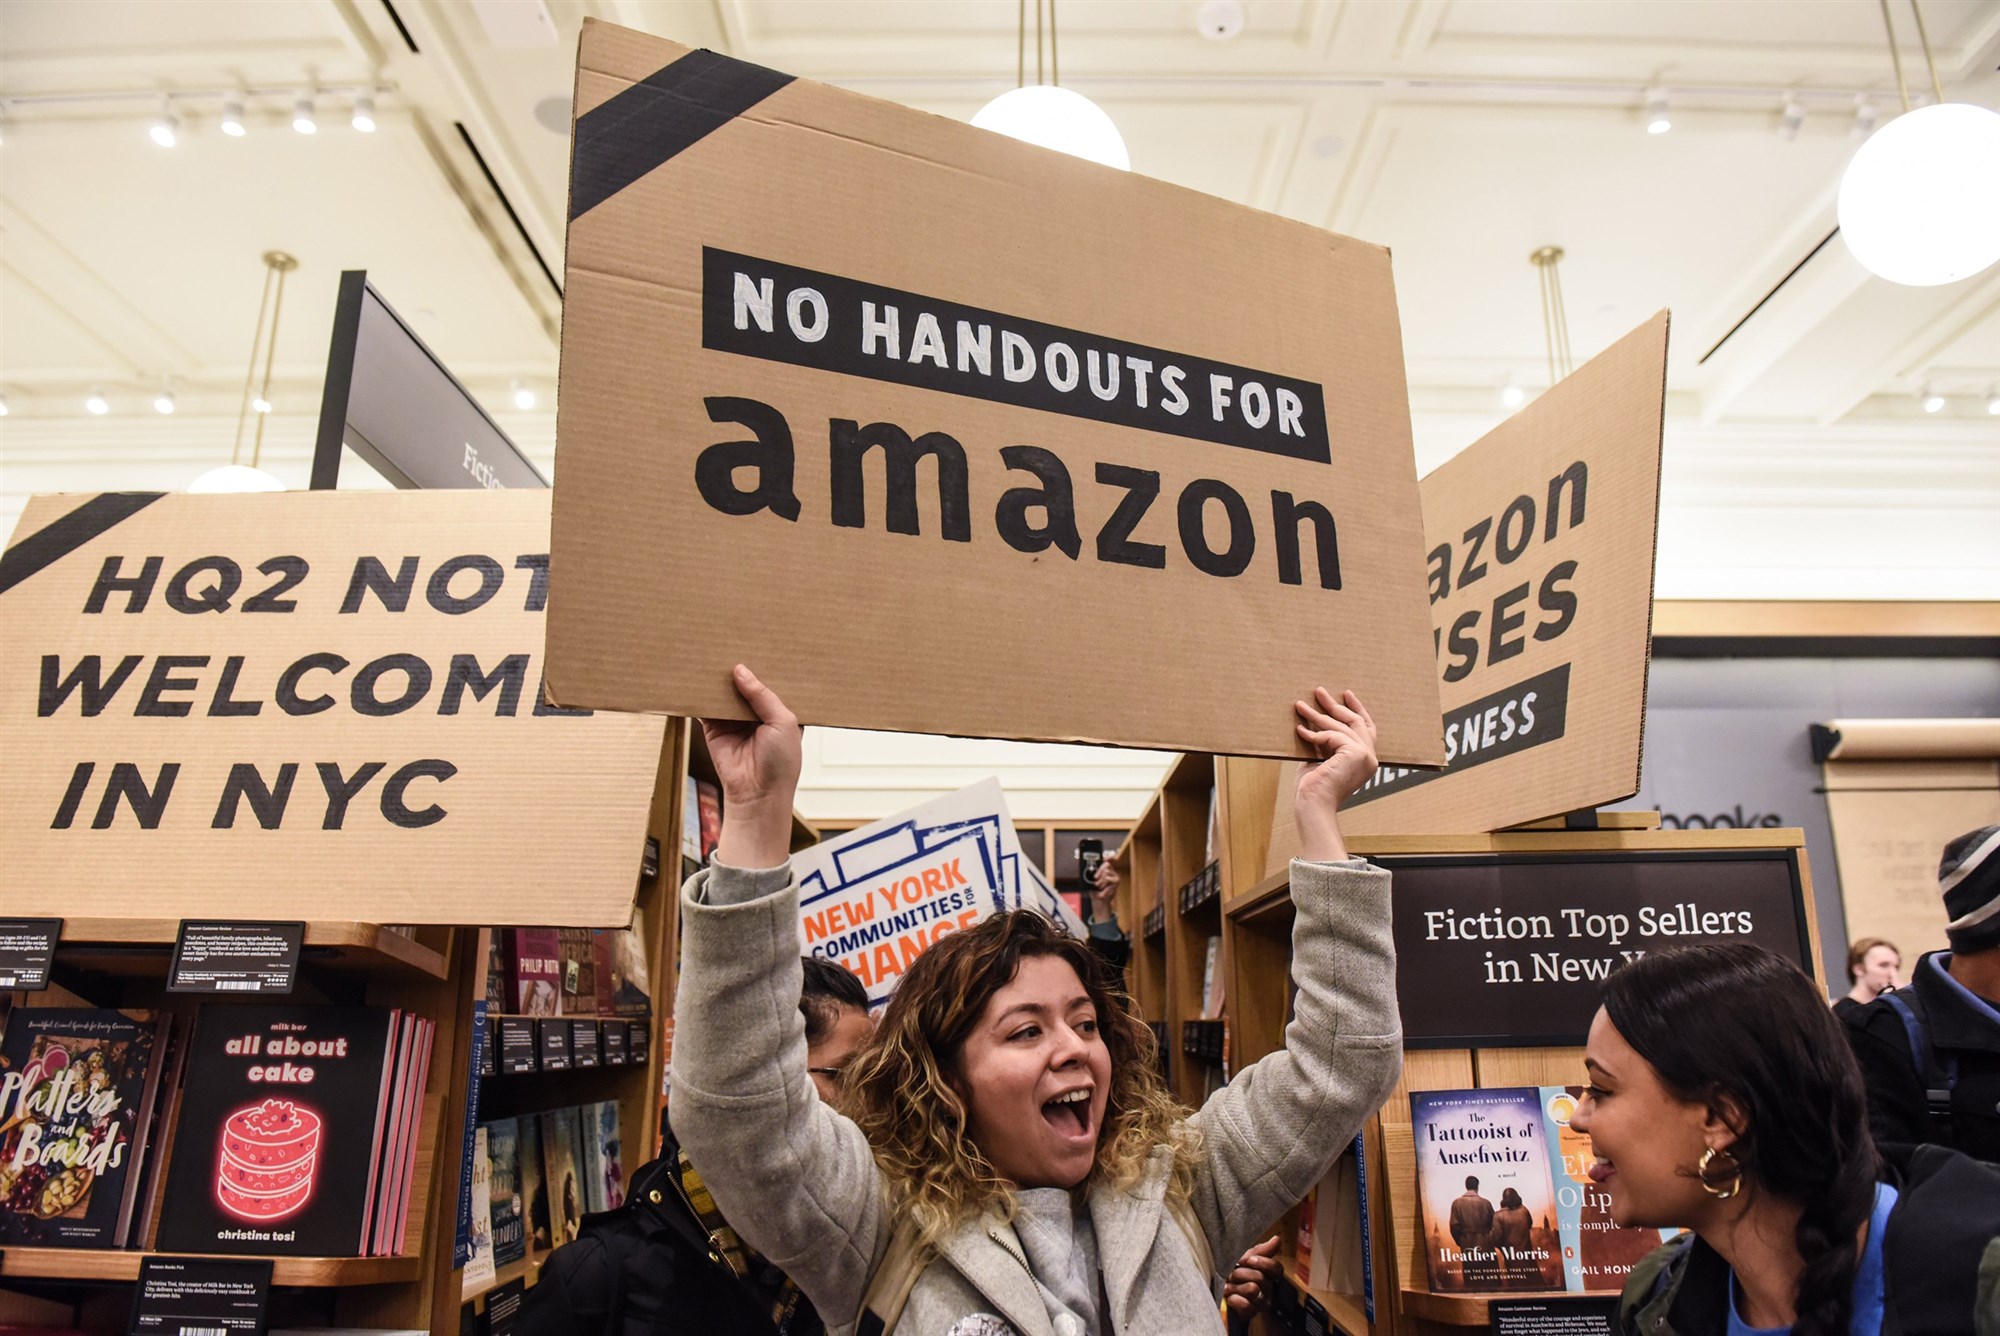 Smart businesses are kind to activist! A lesson to learn from Amazon vs Activist in NY